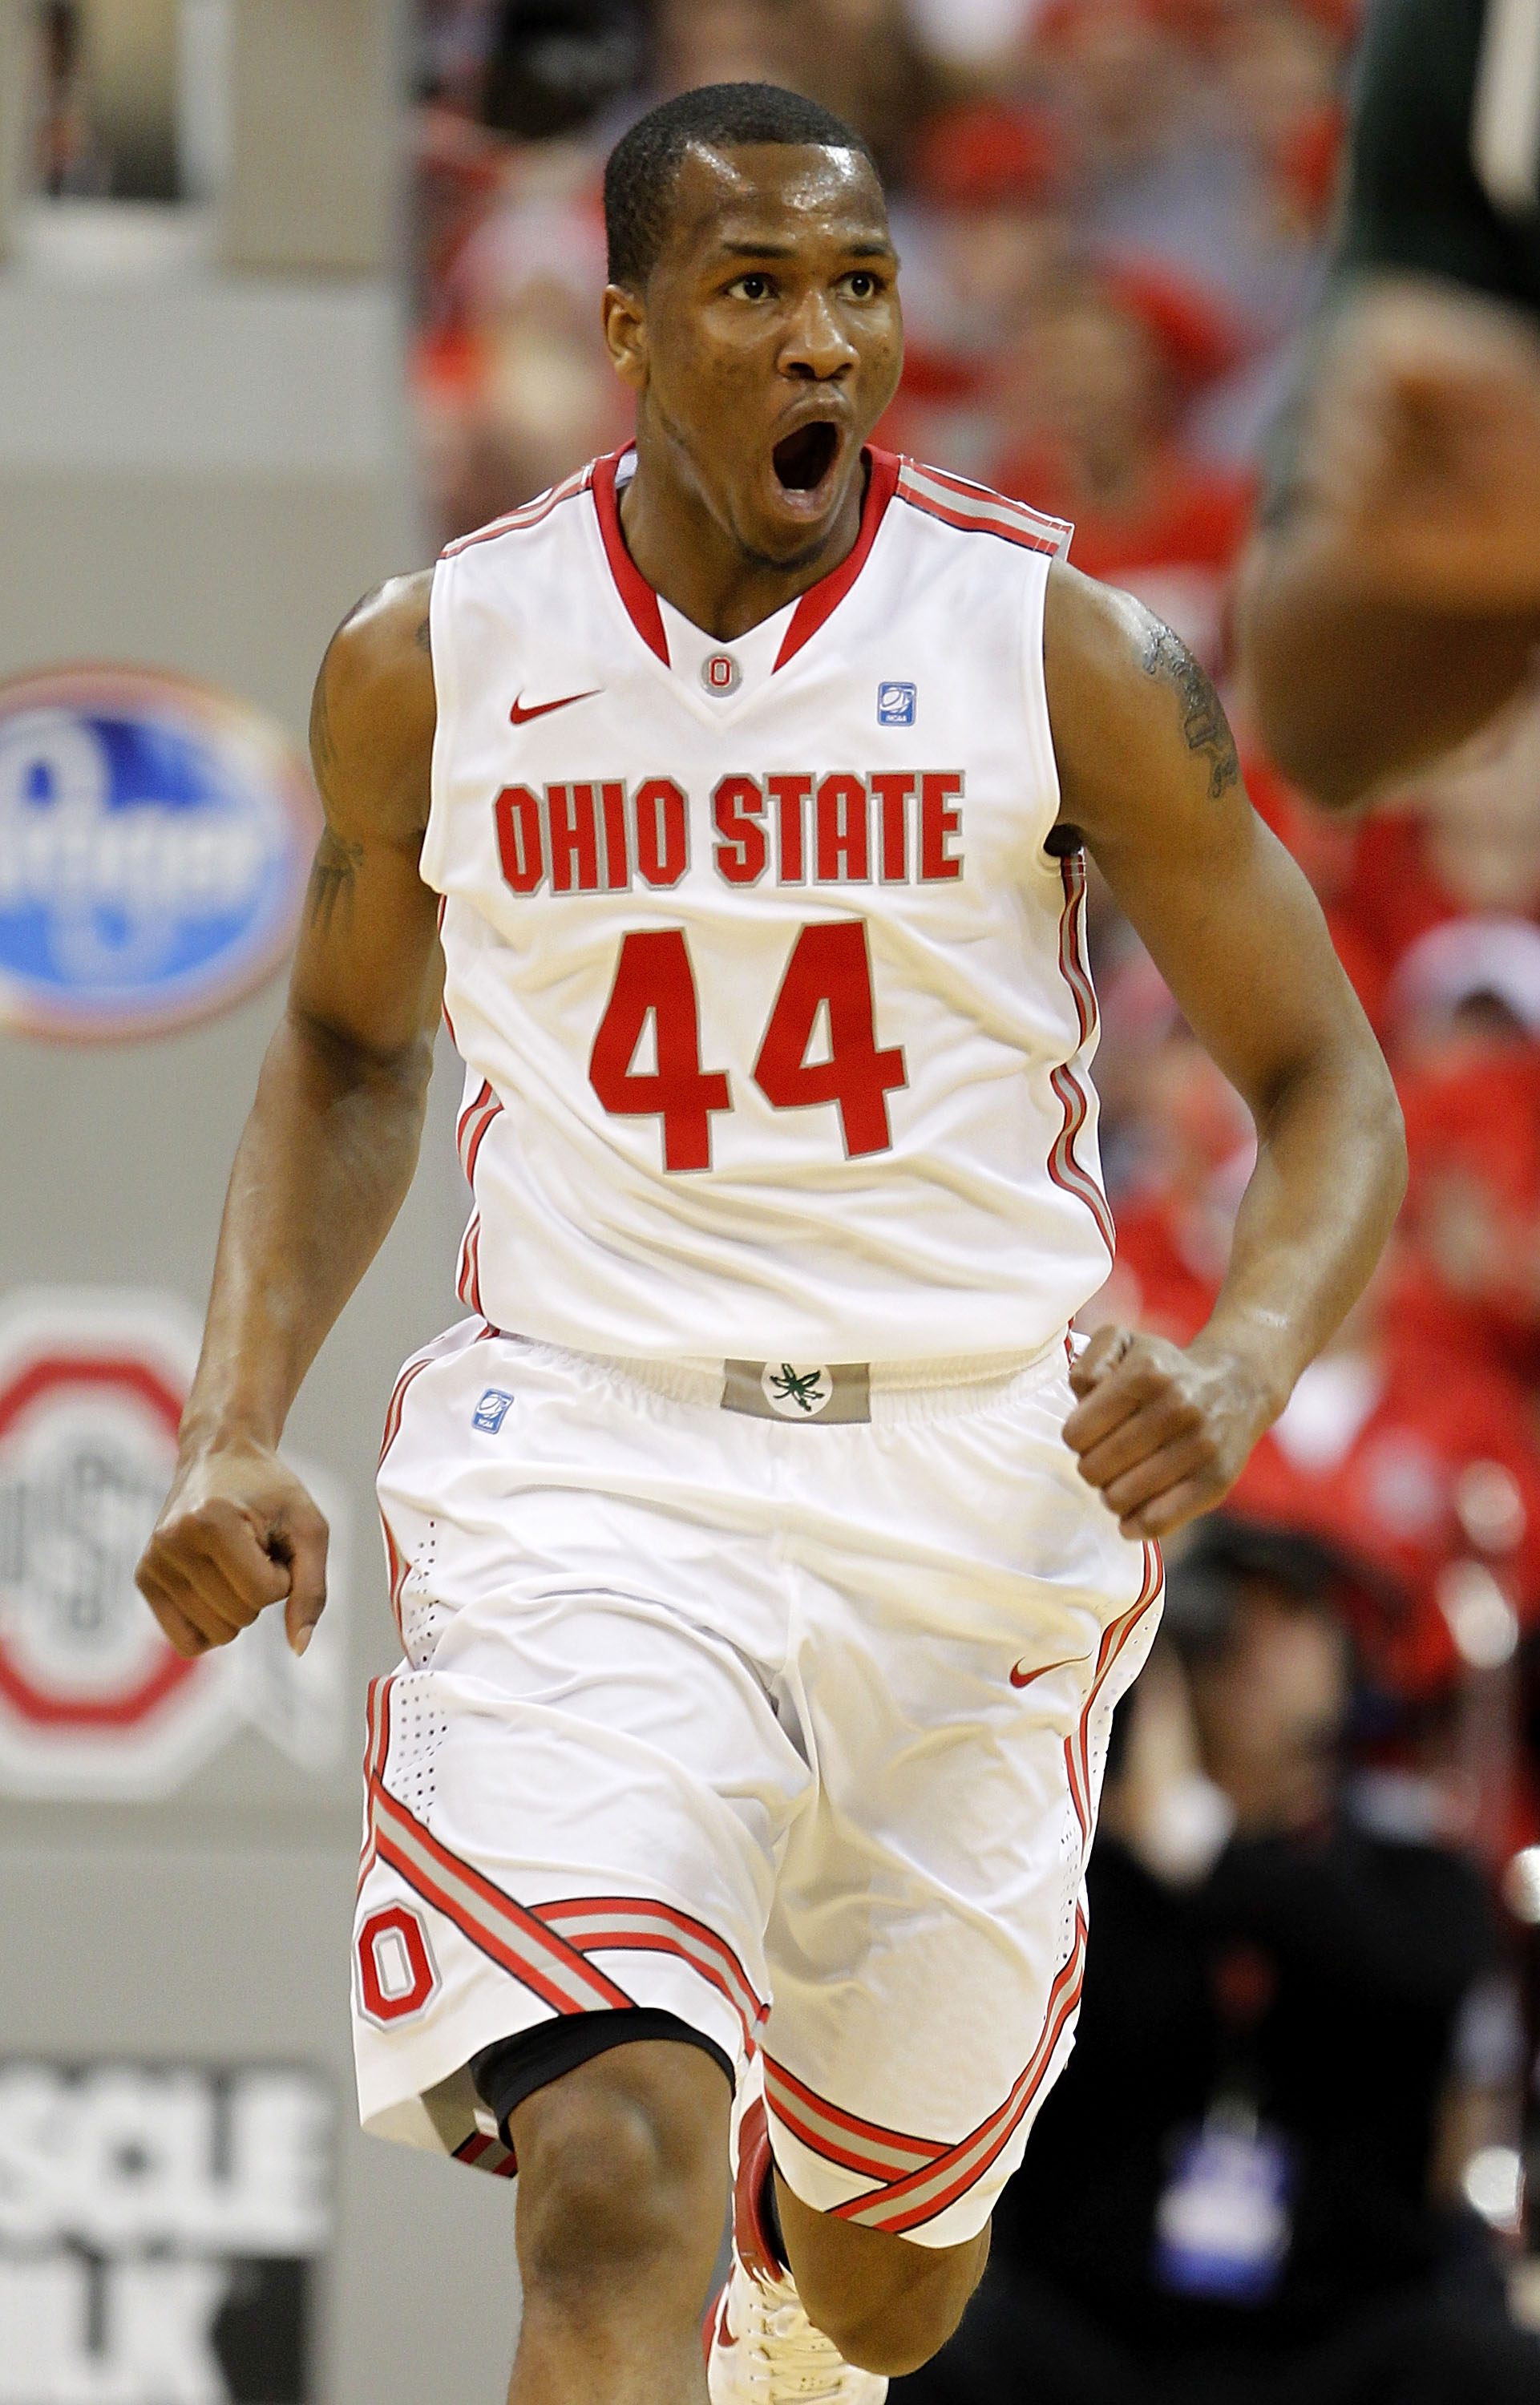 COLUMBUS, OH - FEBRUARY 15: William Buford #44 of the Ohio State Buckeyes celebrates after dunking the ball during the first half against the Michigan State Spartons on February 15, 2011 at Value City Arena in Columbus, Ohio.  (Photo by Gregory Shamus/Get